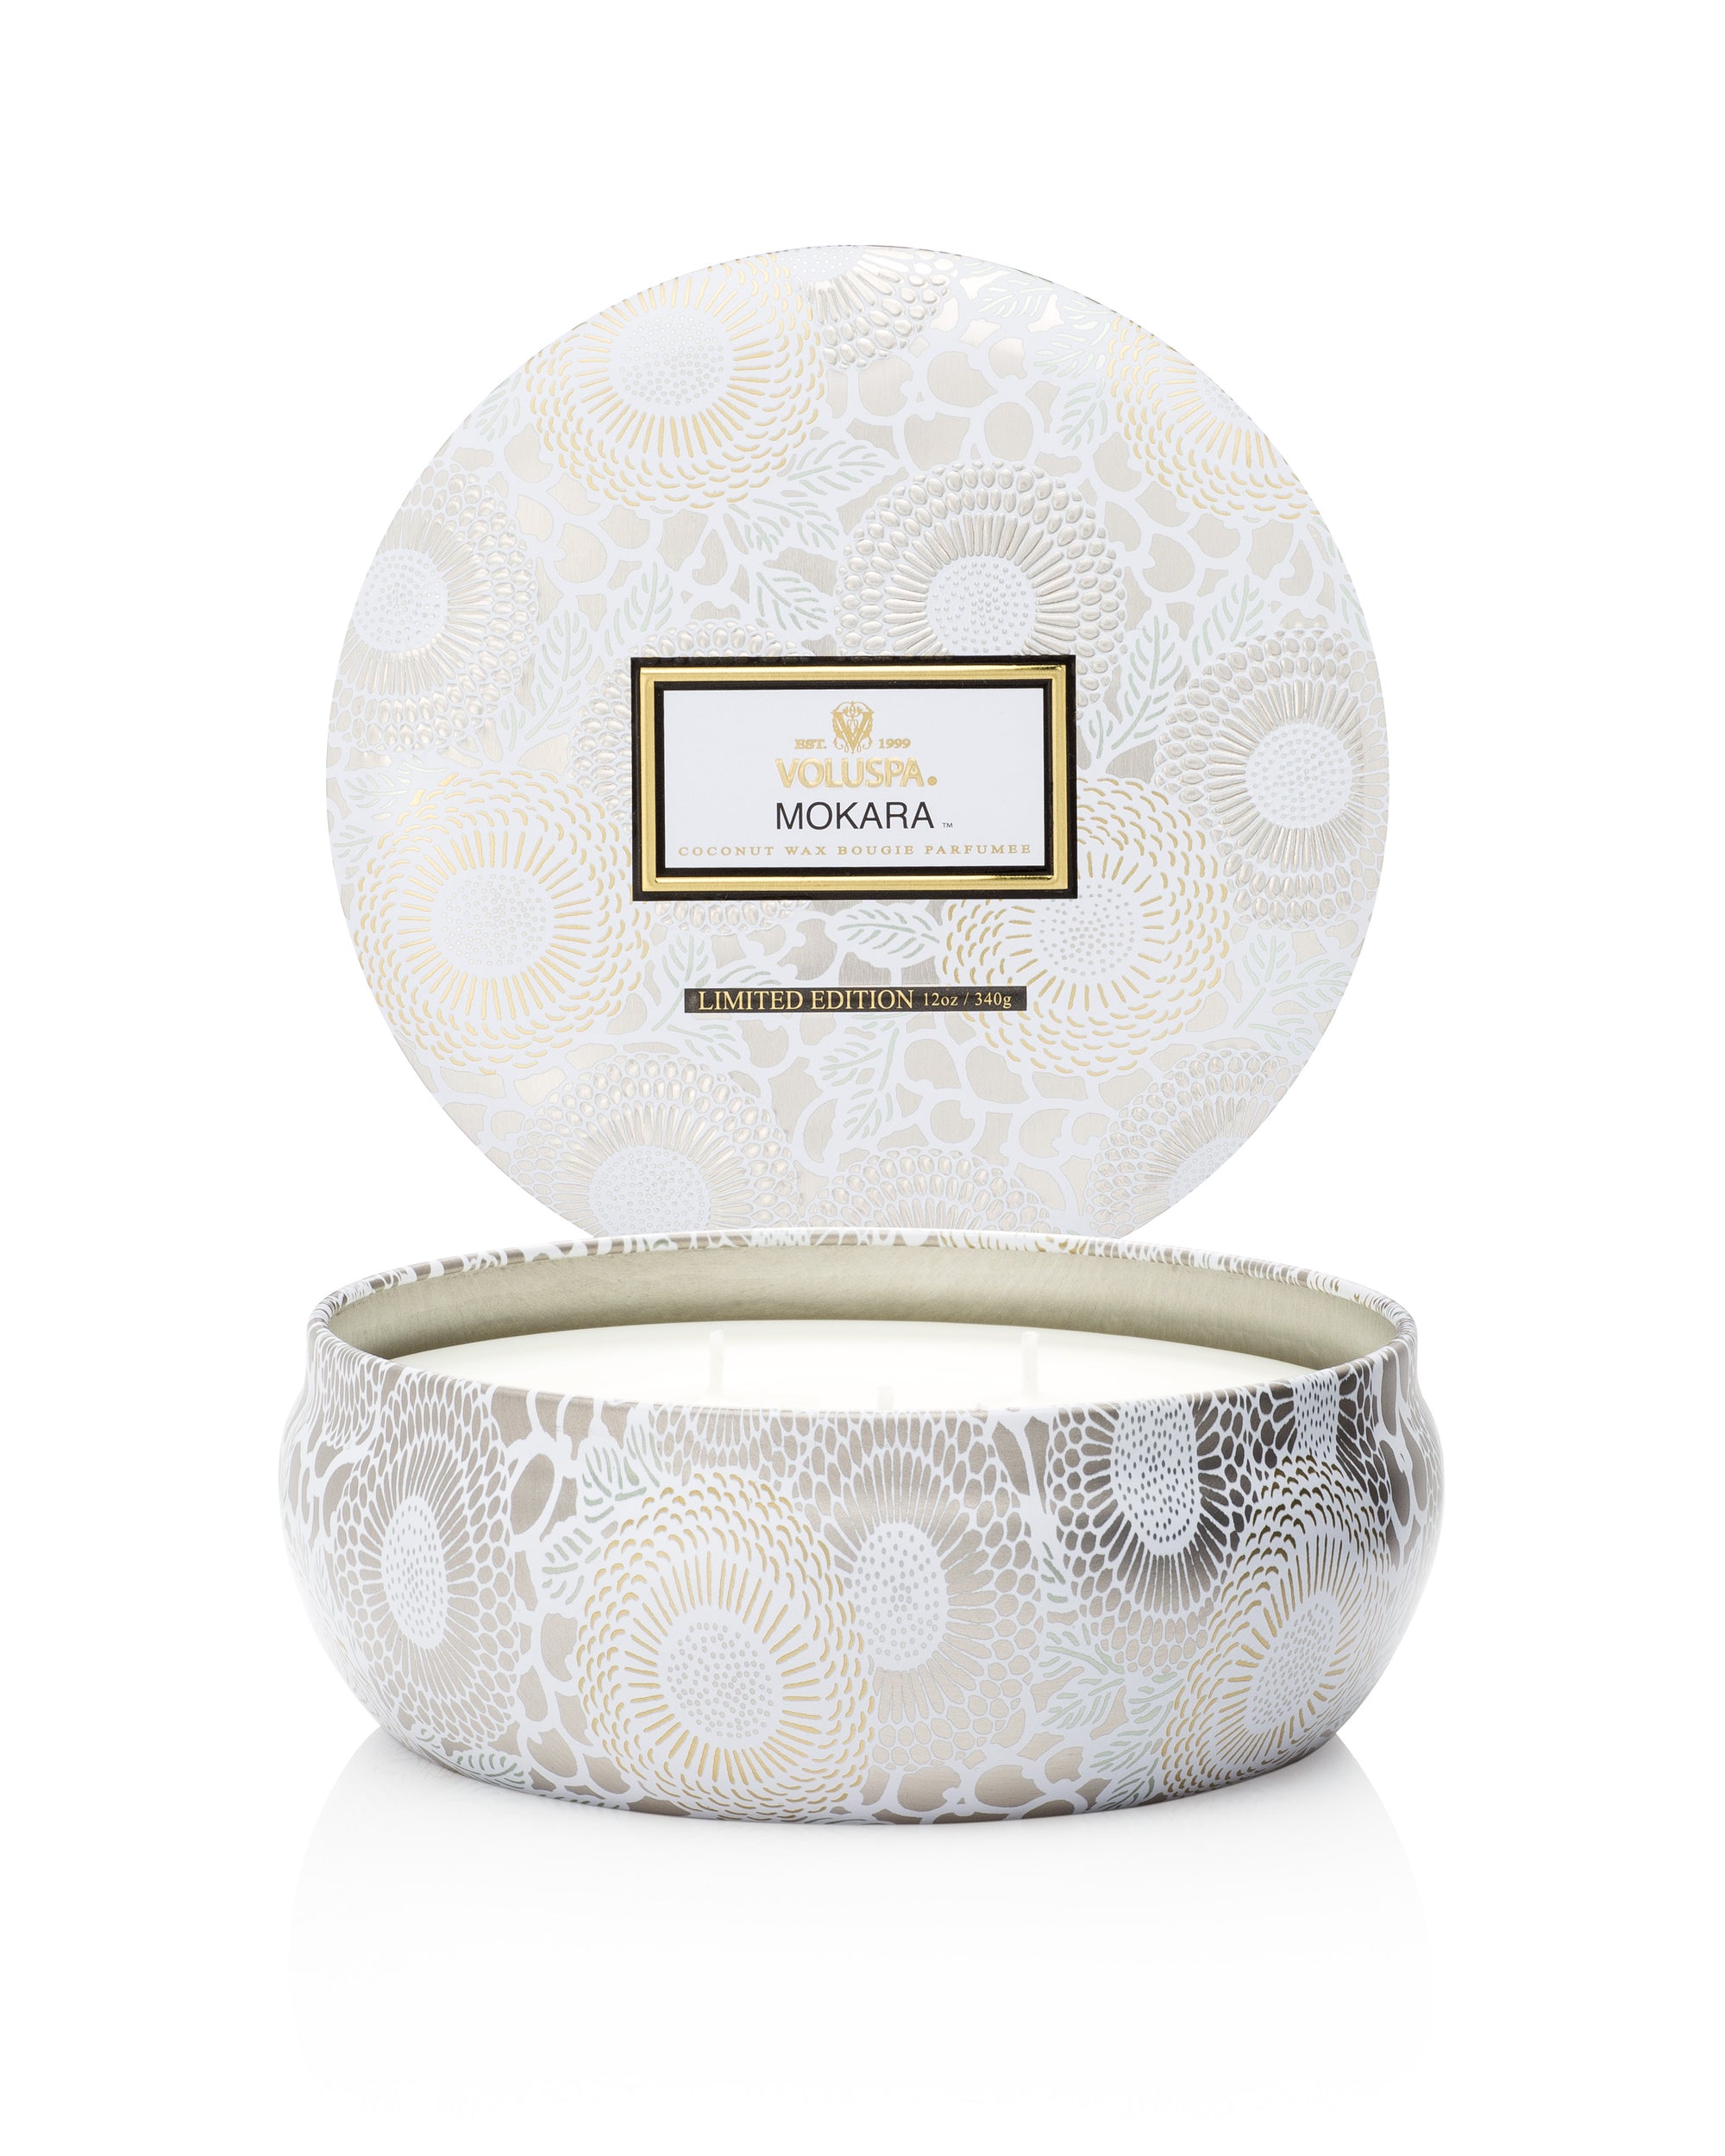 Japonica Limited Mokara 3 Wick Candle in Decorative Tin